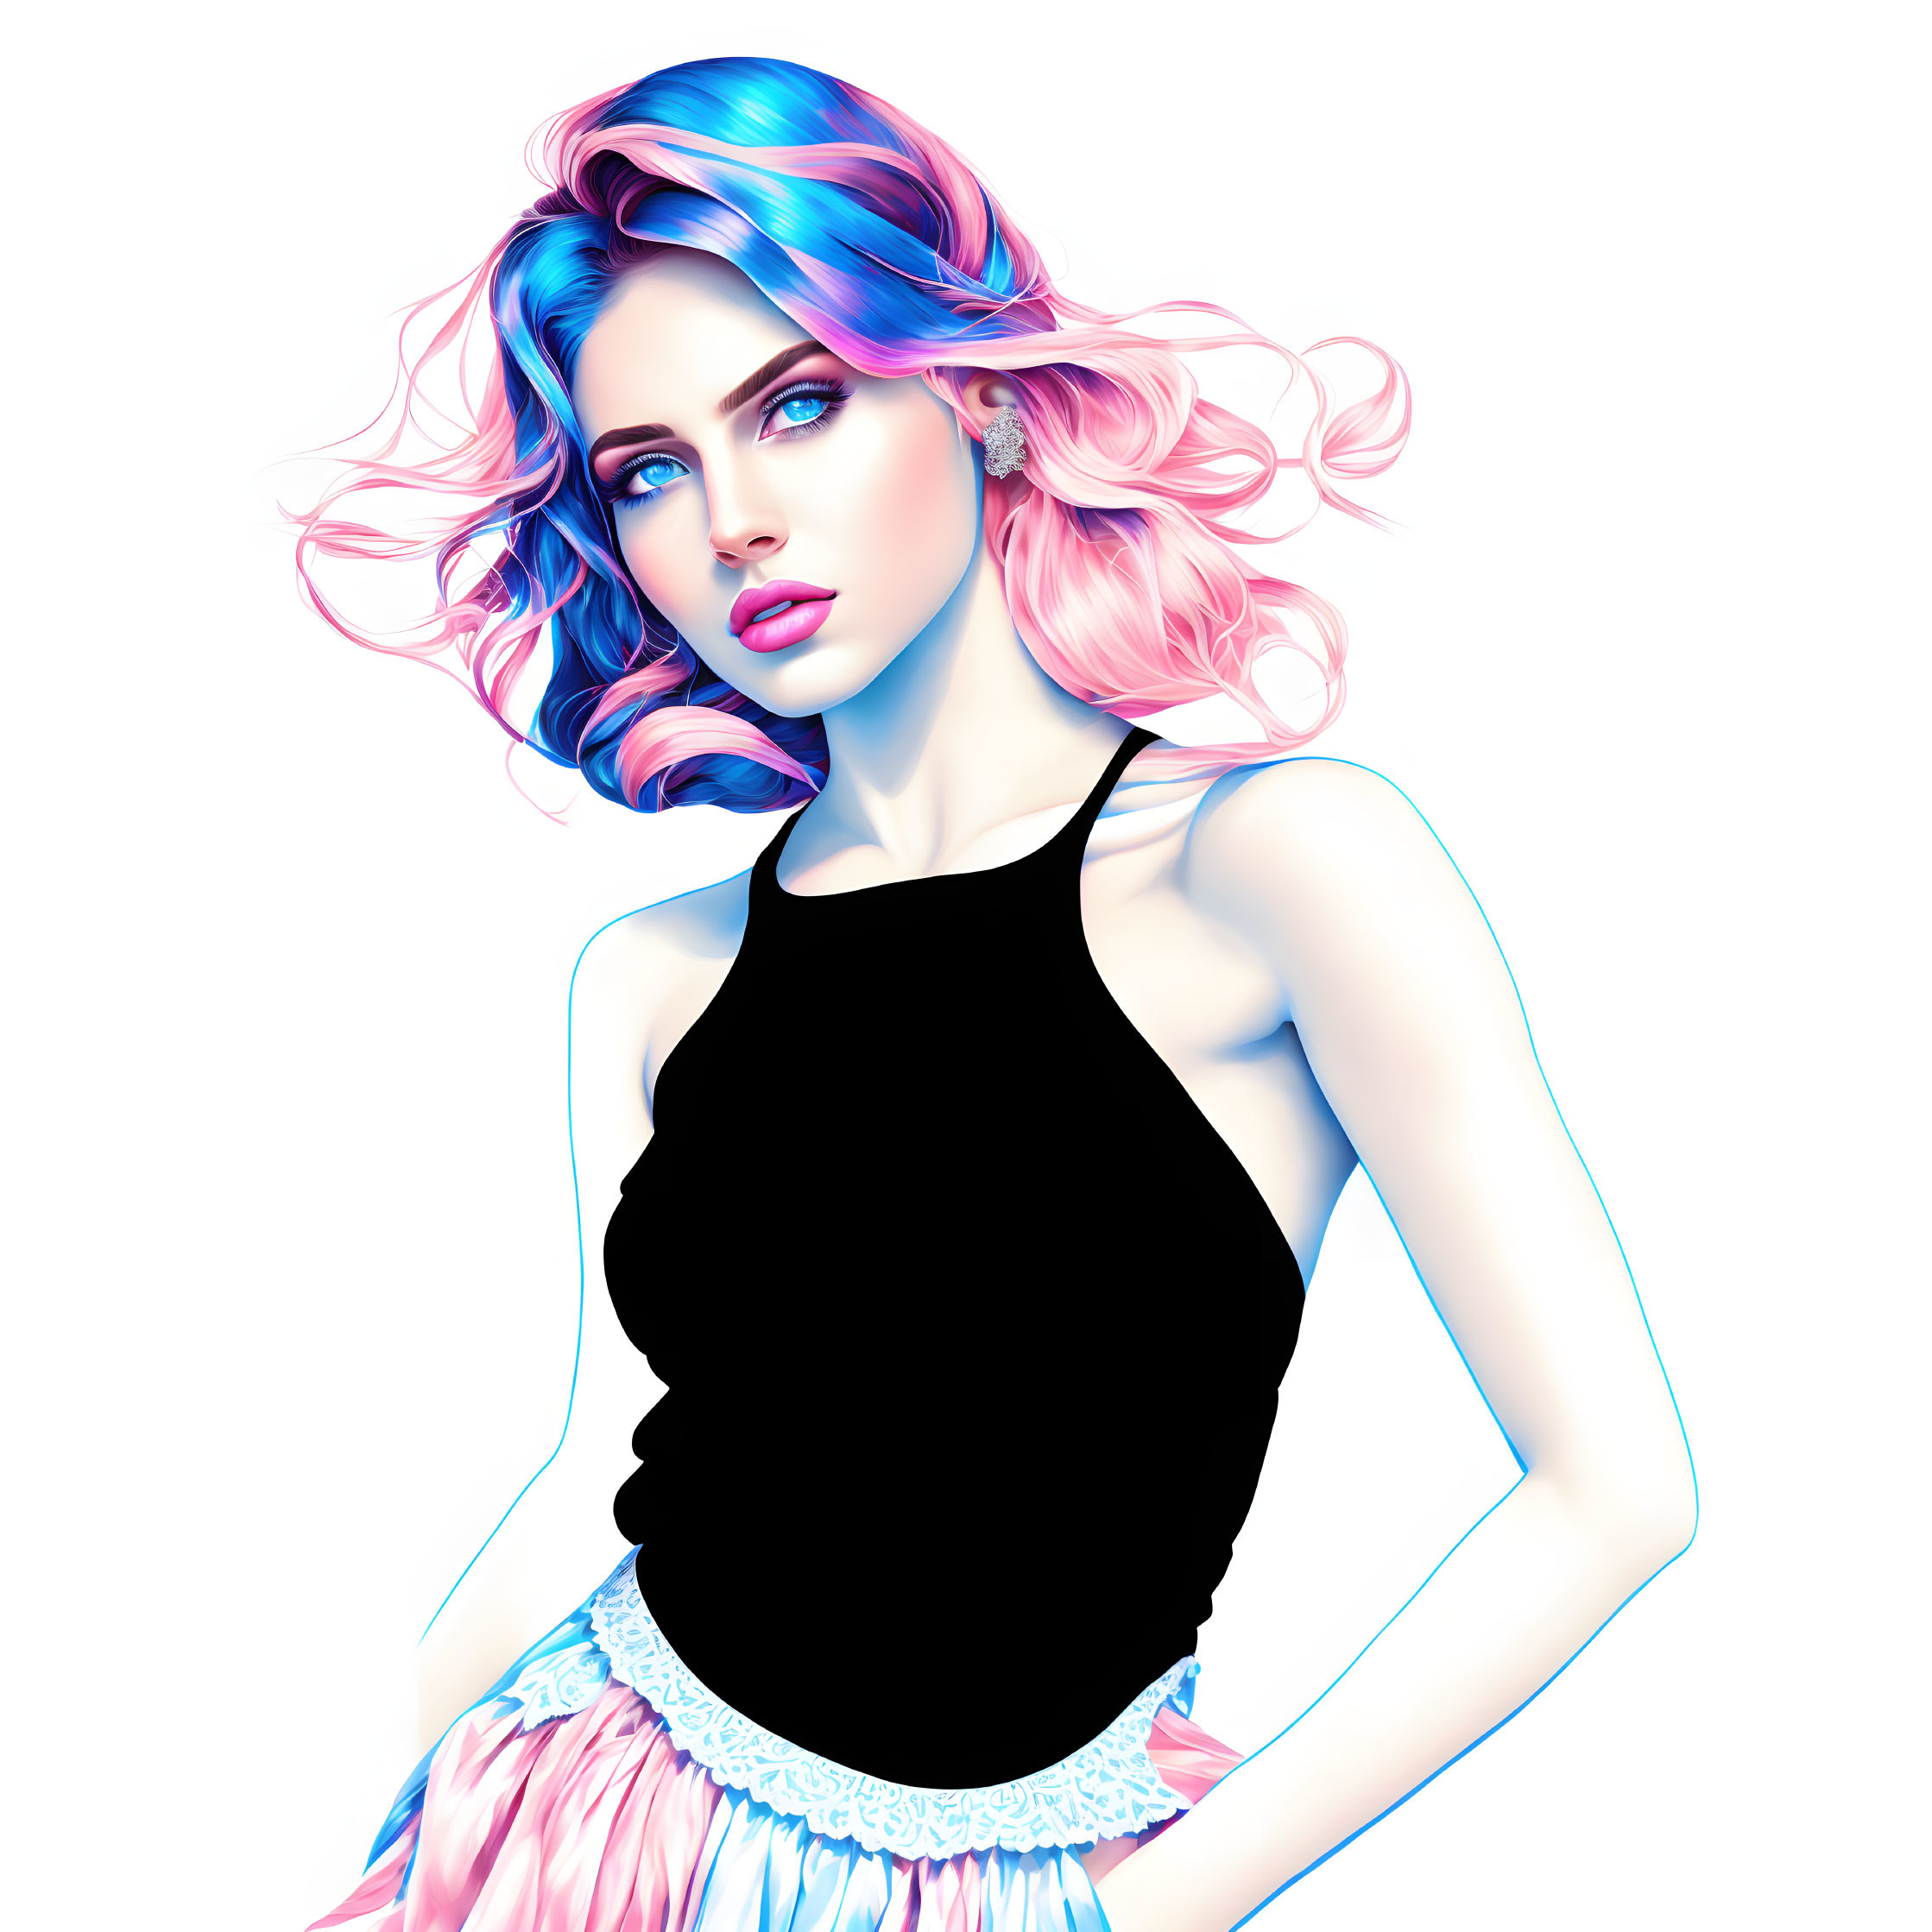 Vibrant blue and pink hair woman in black tank top and pastel skirt illustration